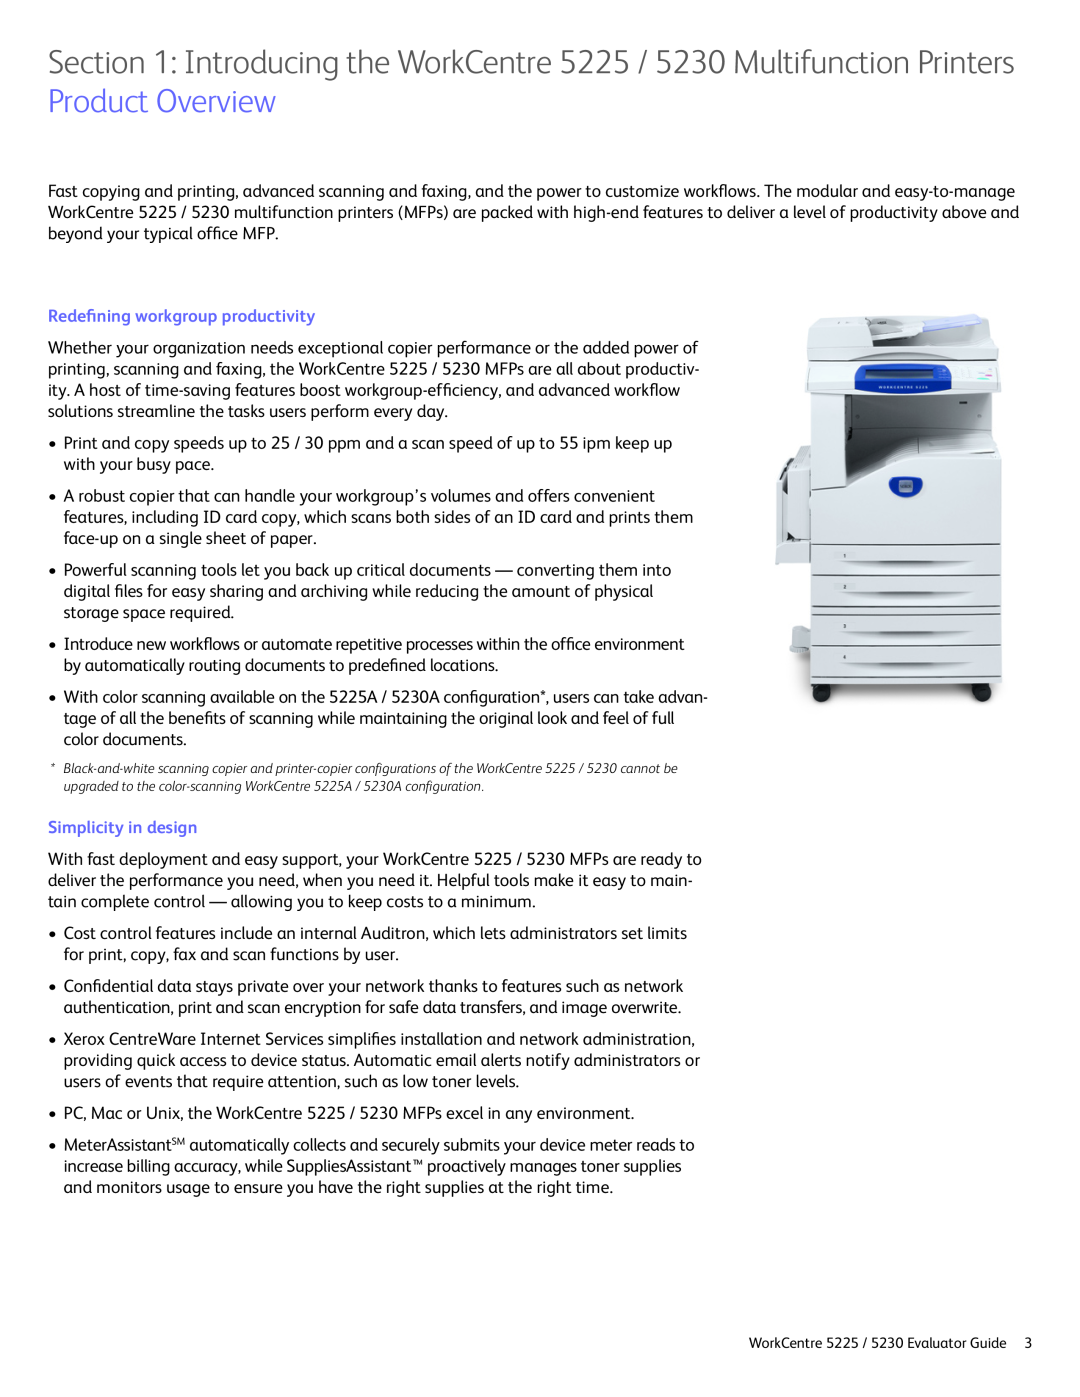 Xerox manual Redefining workgroup productivity, Simplicity in design, WorkCentre 5225 / 5230 Evaluator Guide 